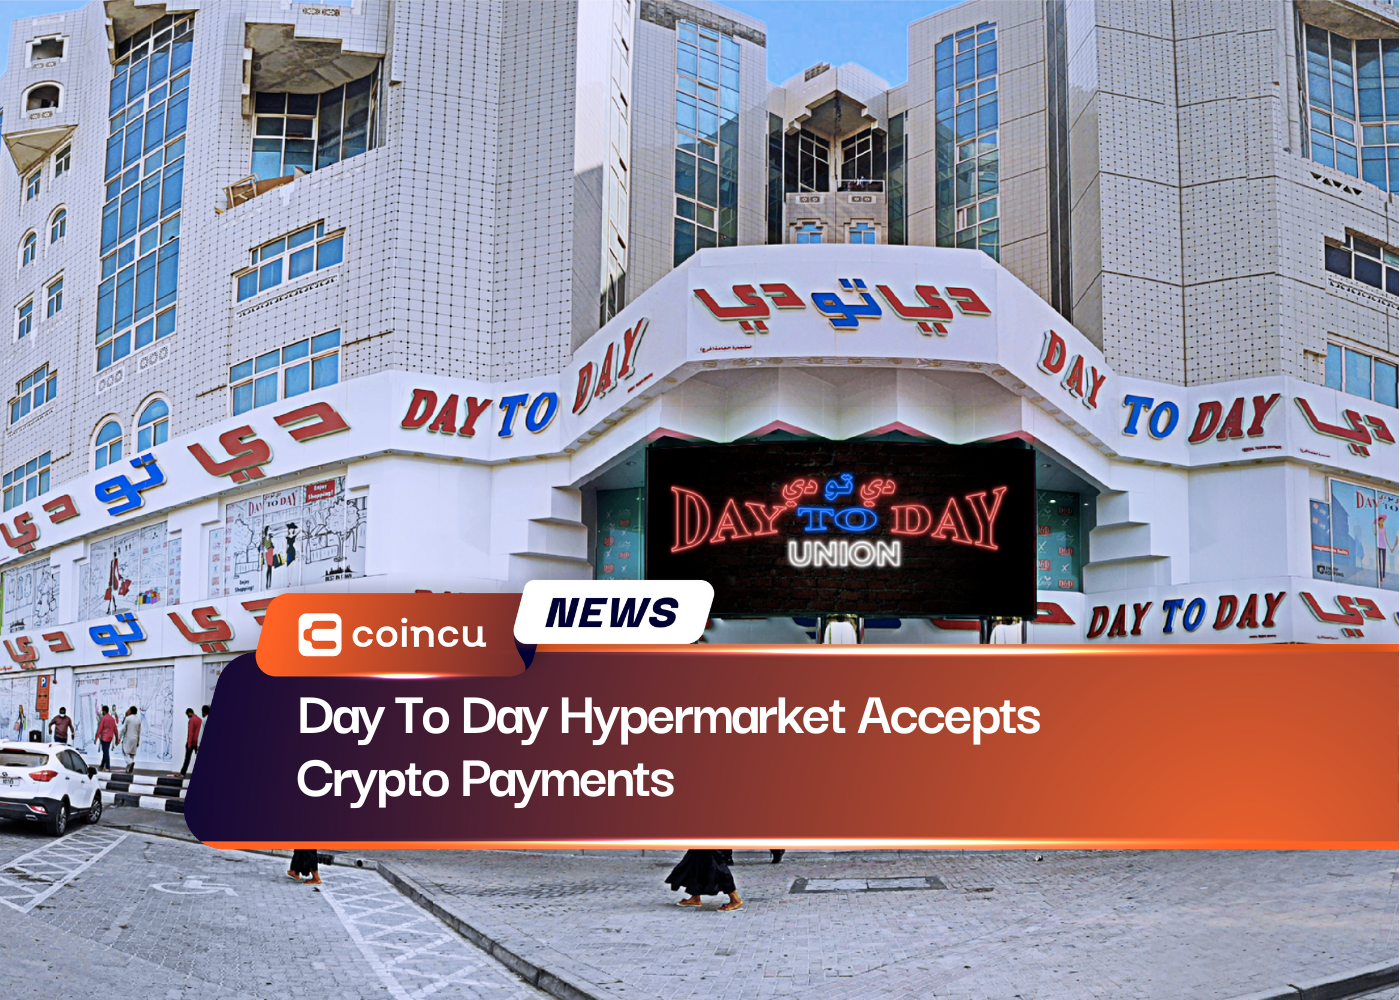 Day To Day Hypermarket Accepts Crypto Payments